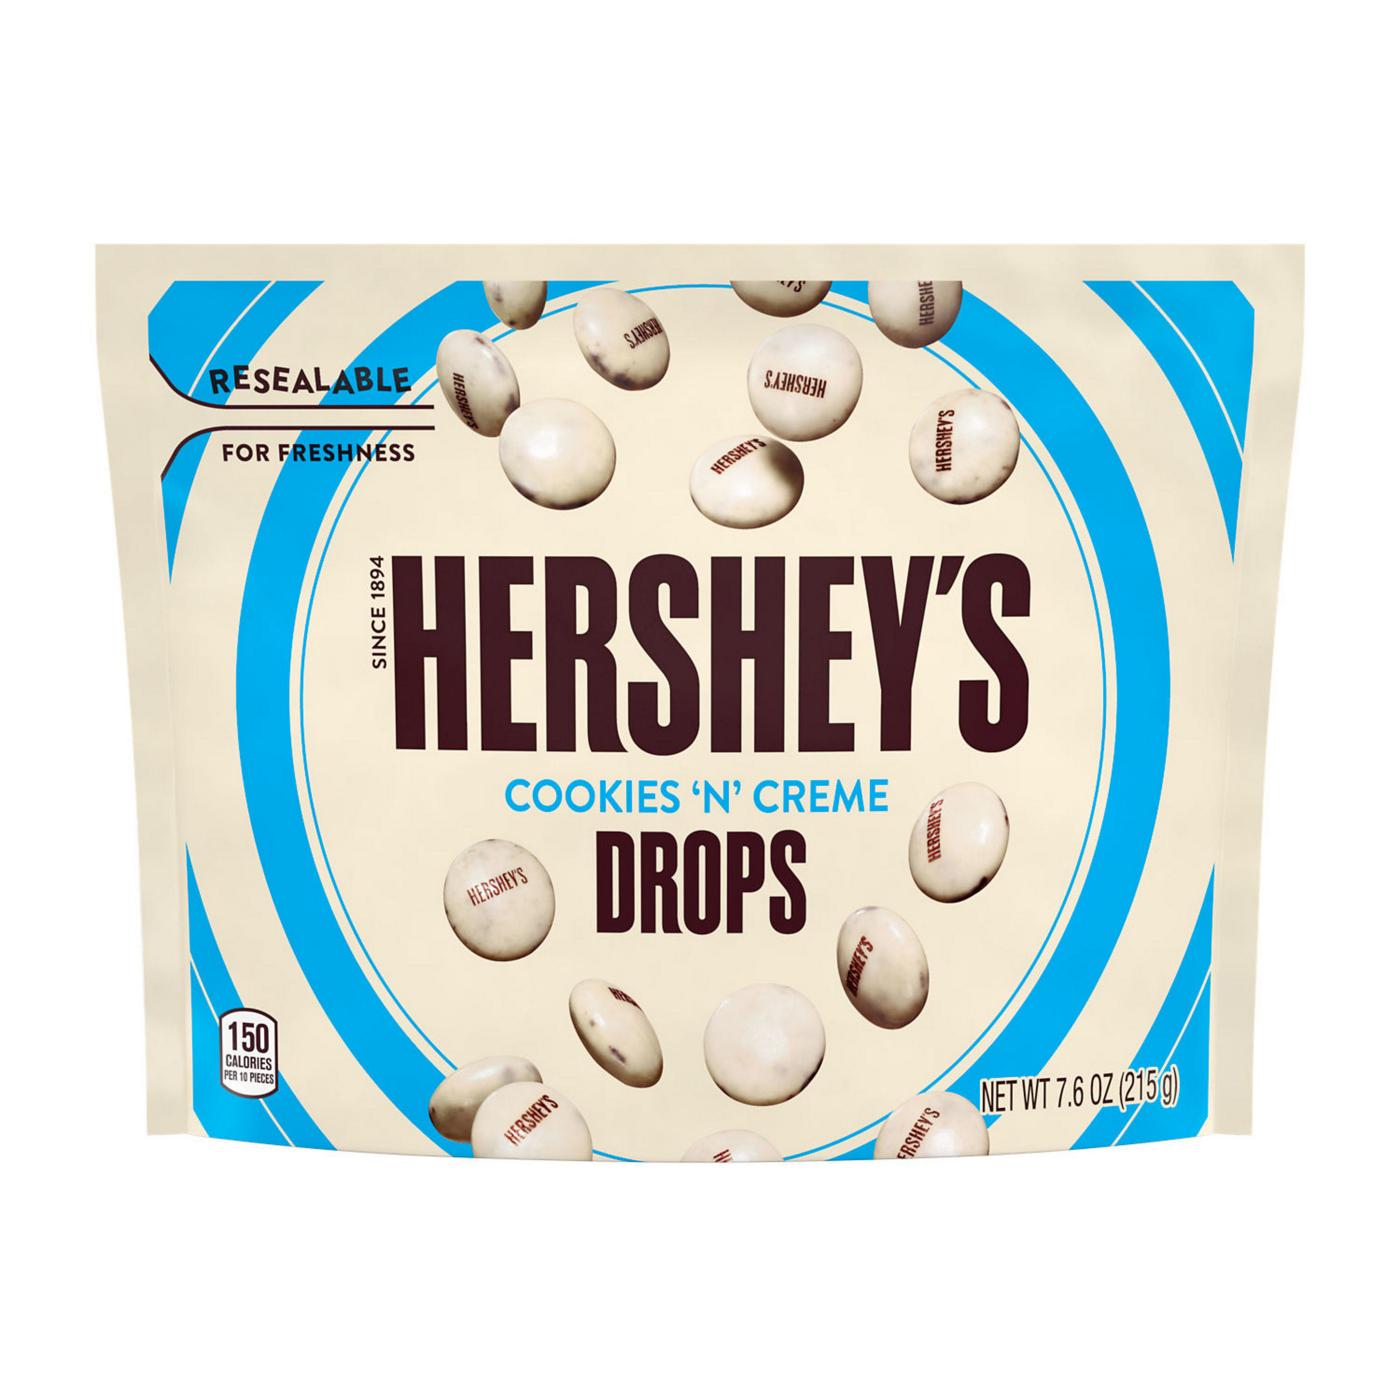 Hershey's Drops Cookies 'N' Crème Candy; image 1 of 6